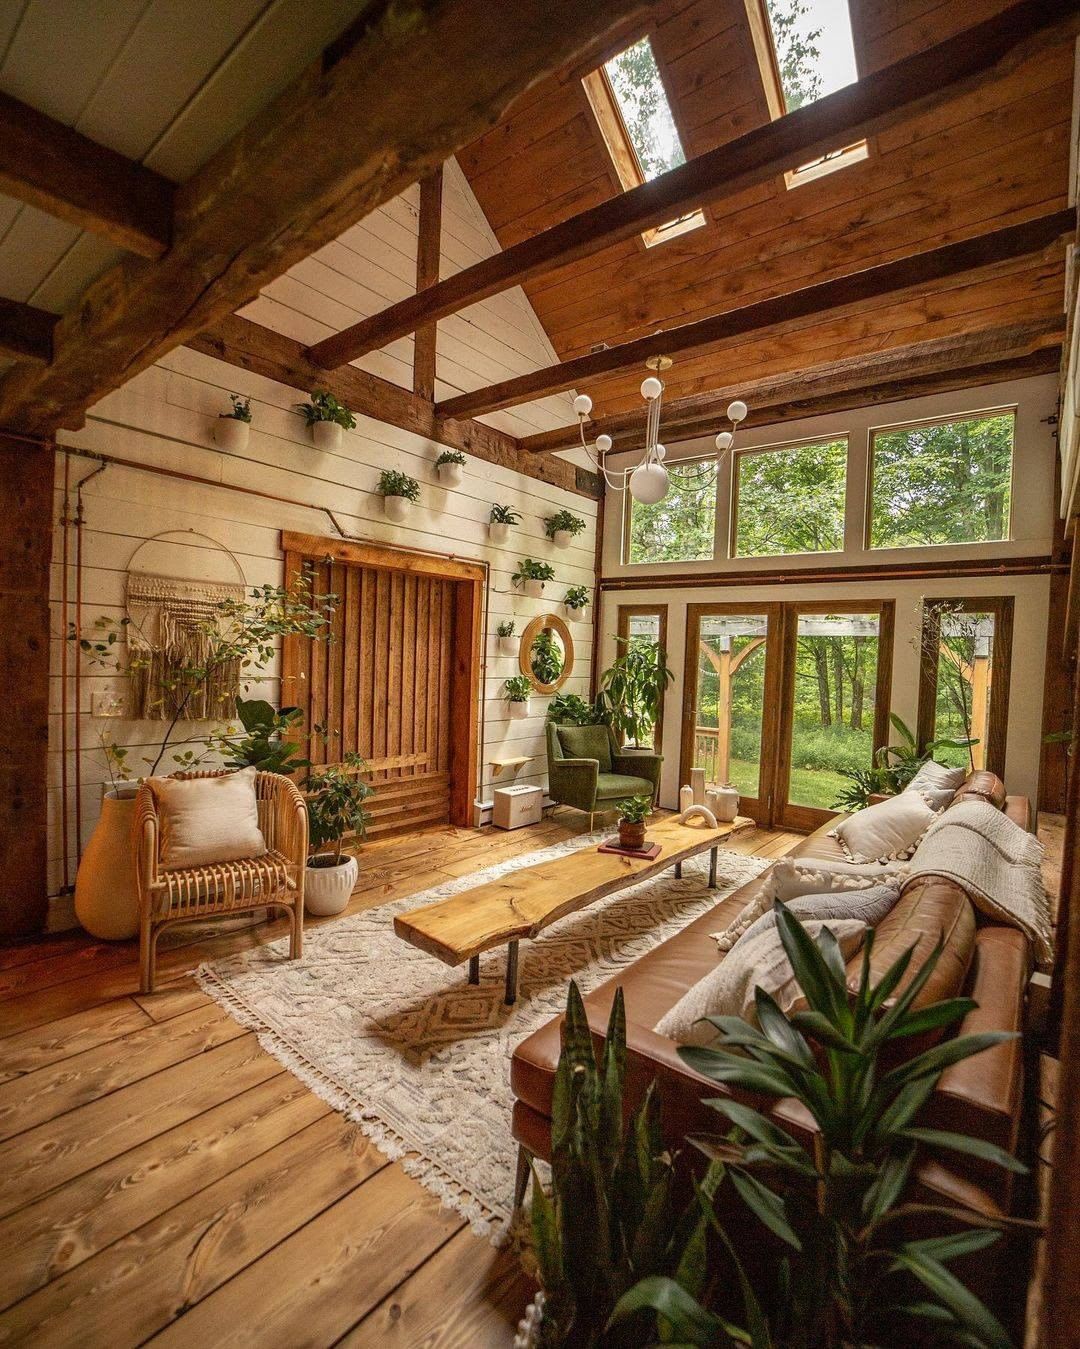 Rustic cabin with exposed beams and skylights in Jewett, Greene County, New York